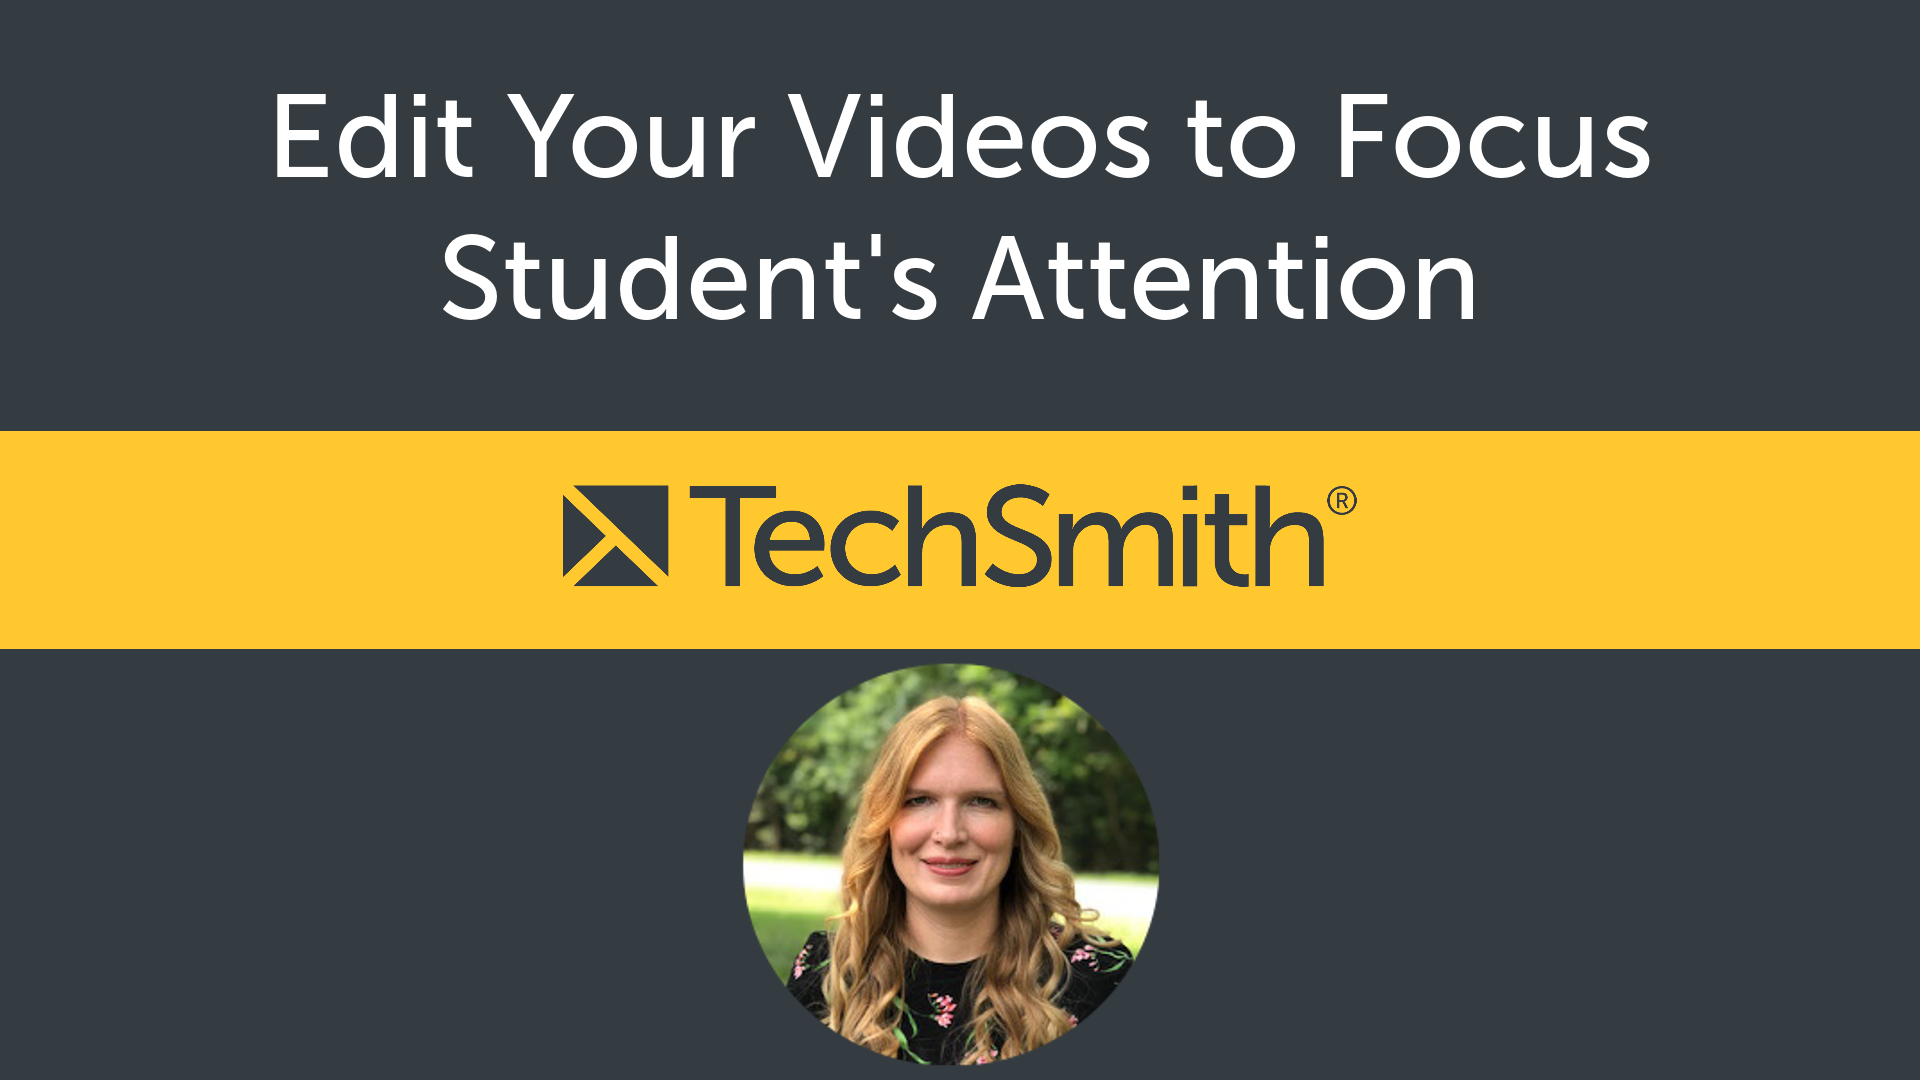 Edit Your Videos to Focus Student's Attention